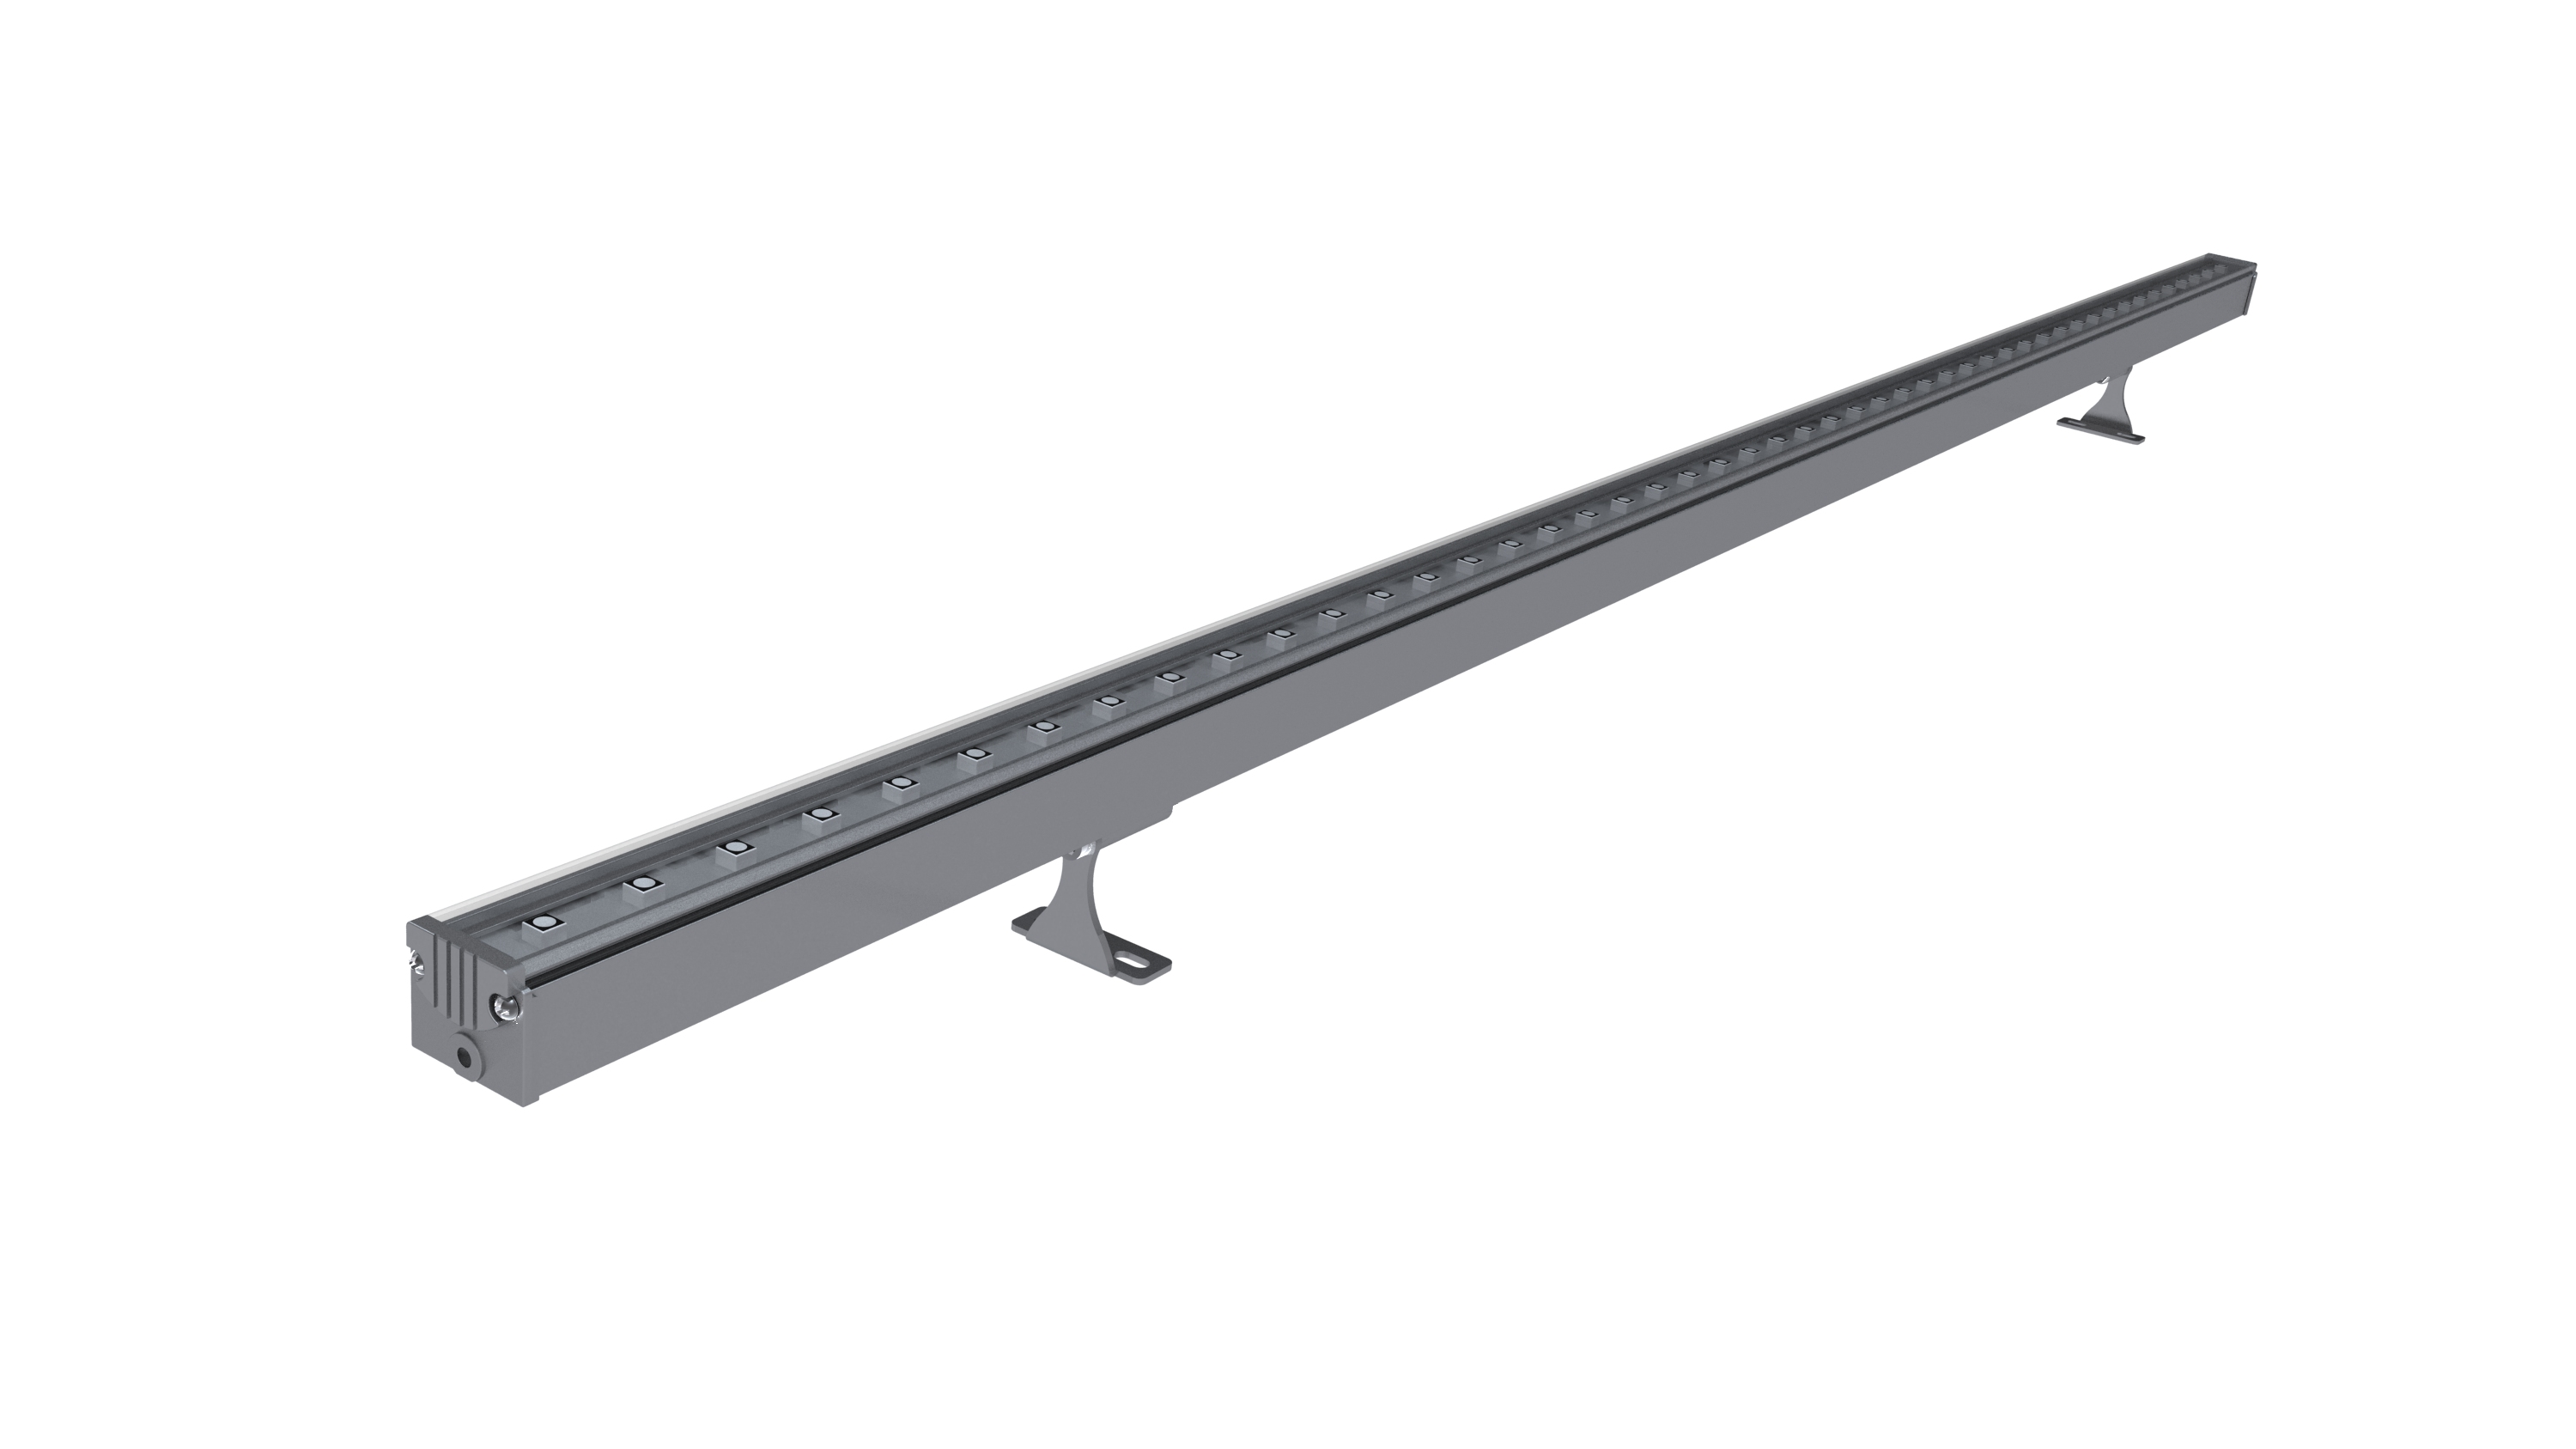 Architectural linear LED lighting